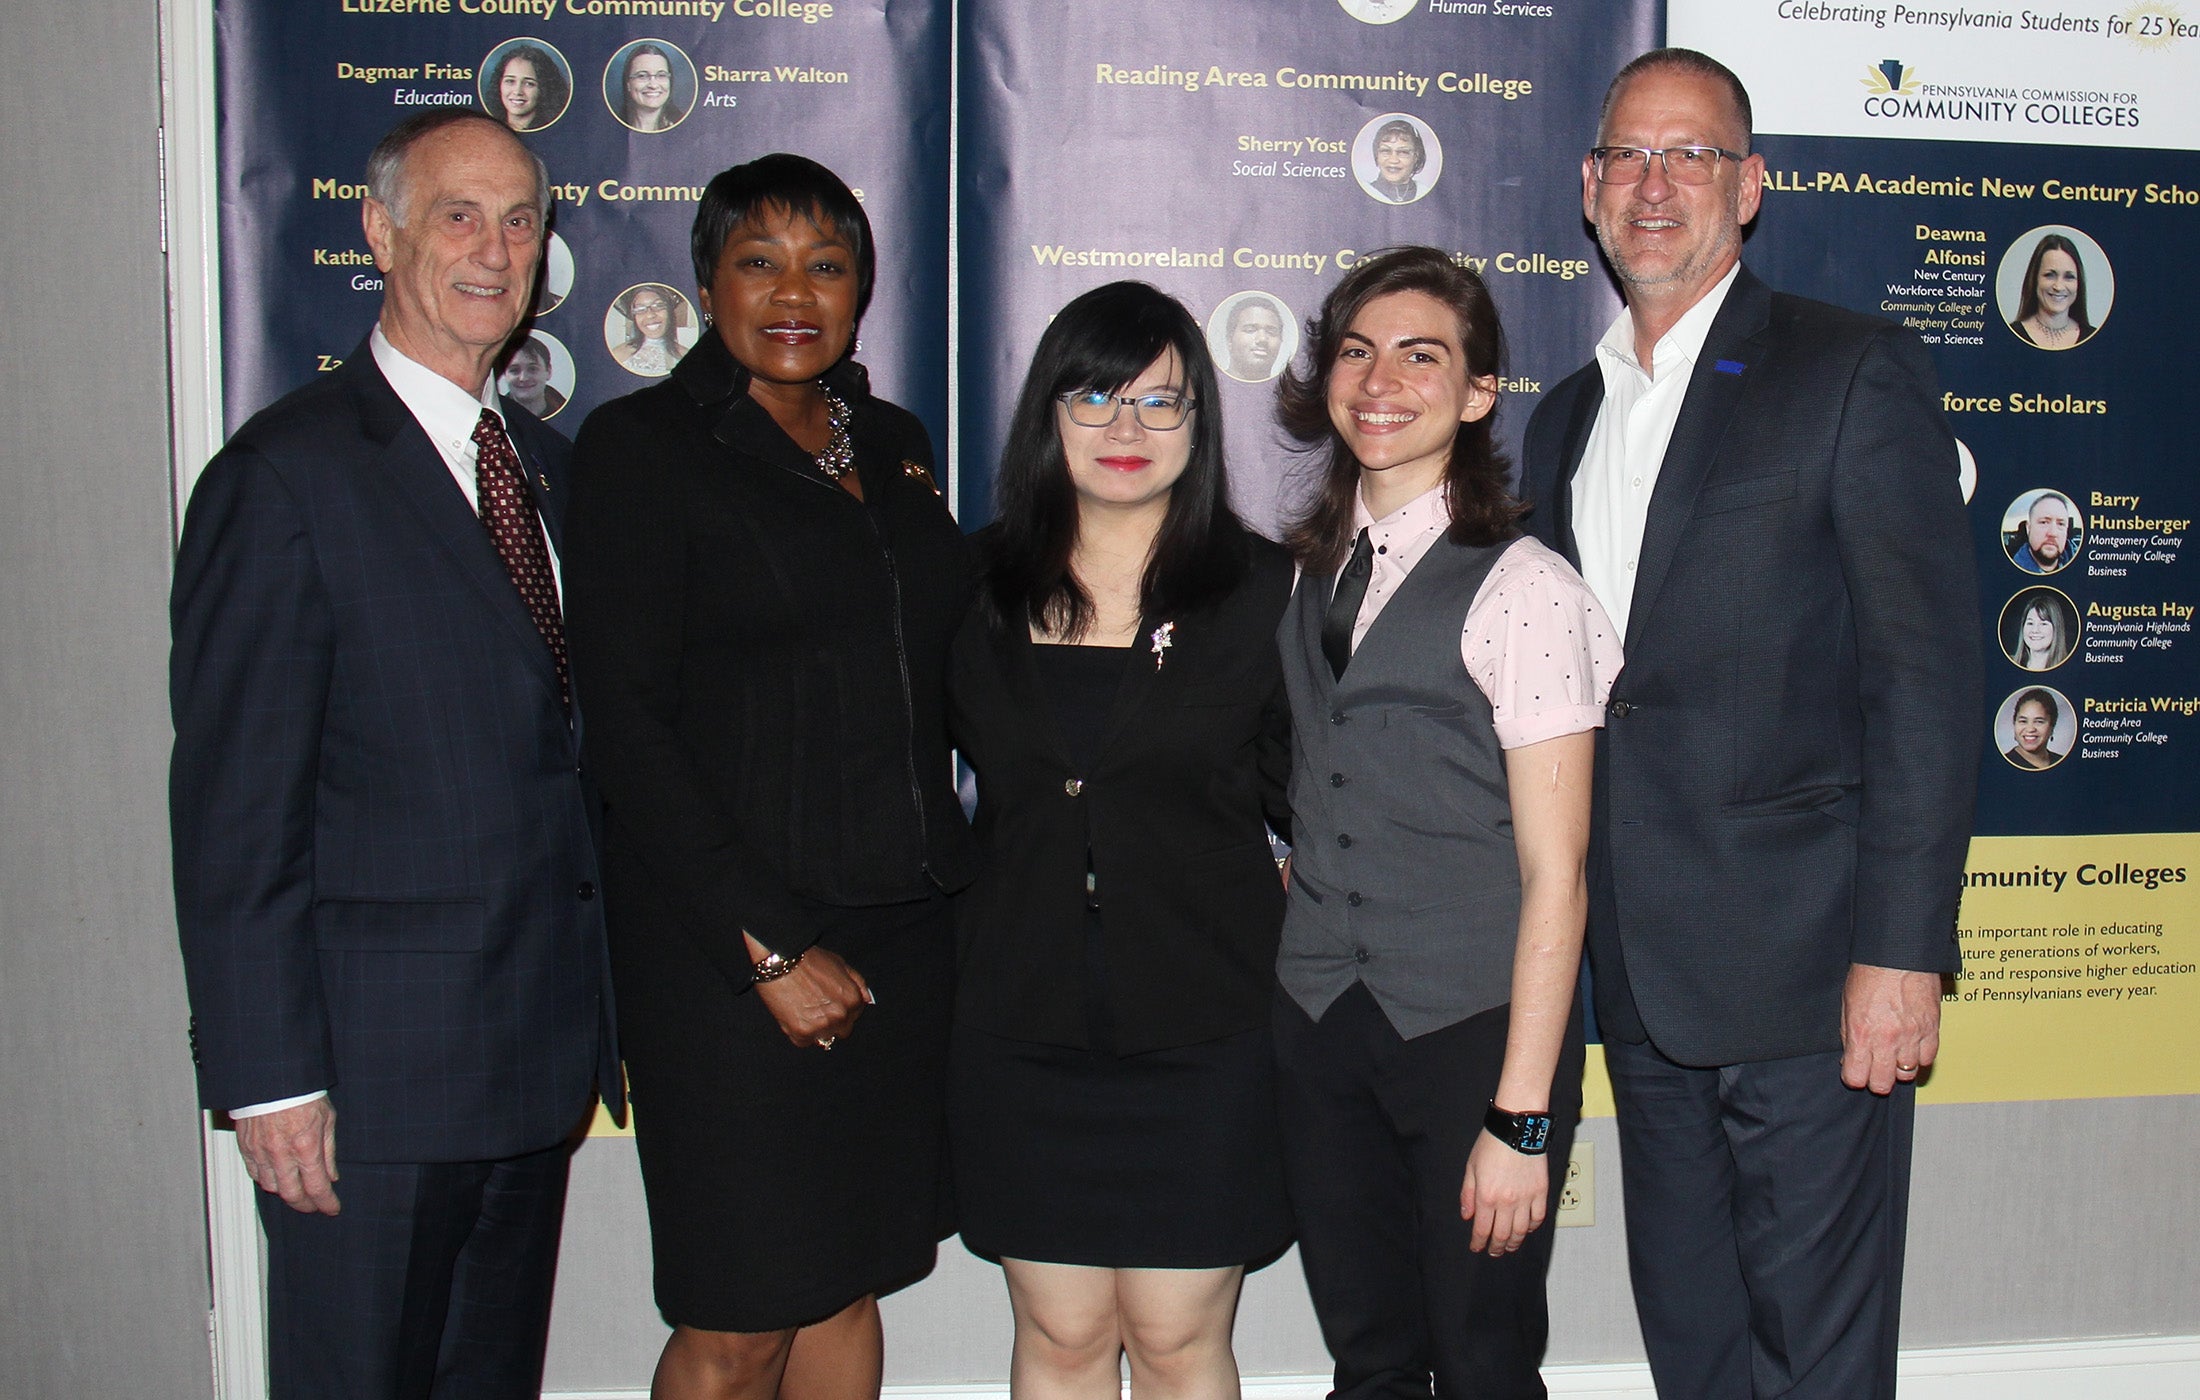 Delaware County Community College Board of Trustees Chair Donald Heller, President Dr. L. Joy Gates Black, All-PA Scholar Zun Phyu Thant, All-PA and Coca-Cola Silver Scholar Em Mirra, and Trustee Michael Ranck